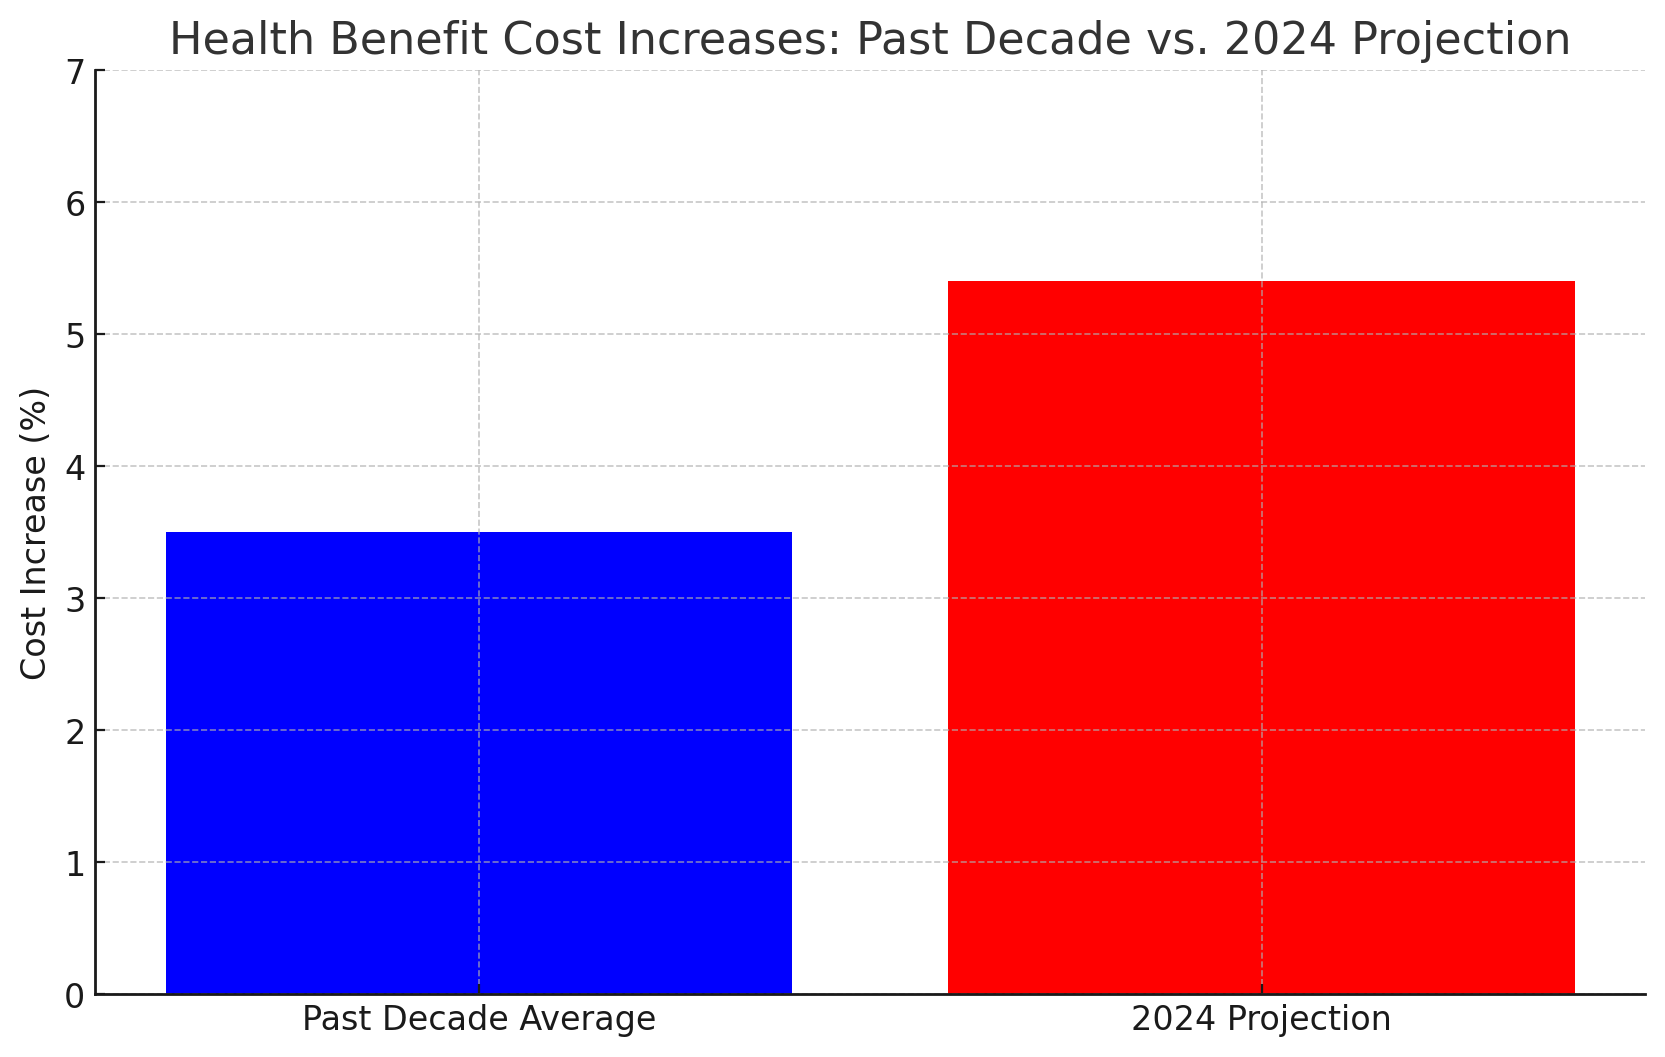 2024 Projection for Health Insurance